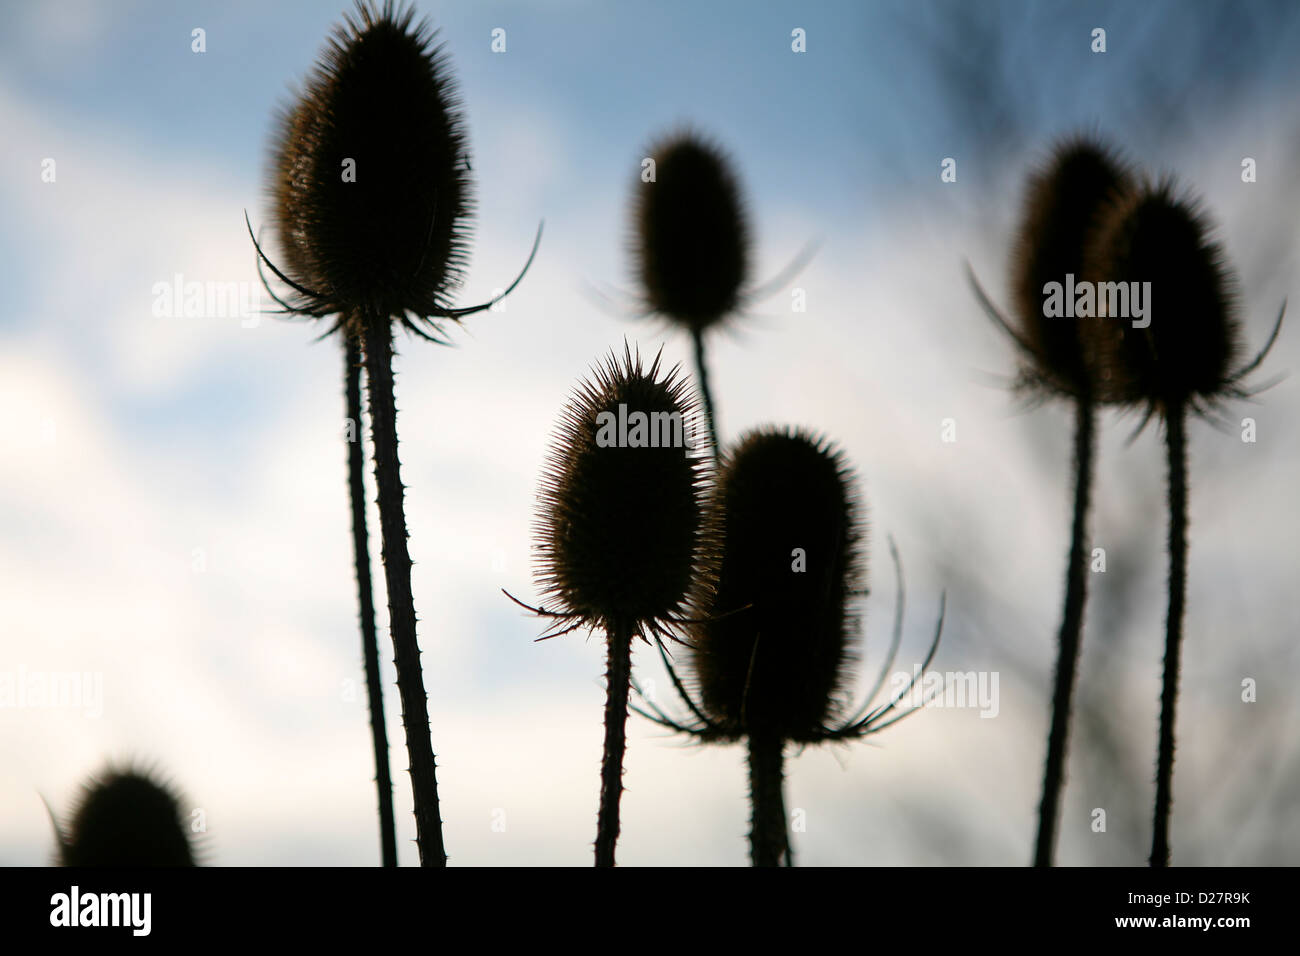 Silhouette of several common teasel (Dipsacus fullonum) dried seed heads, for winter interest. Stock Photo